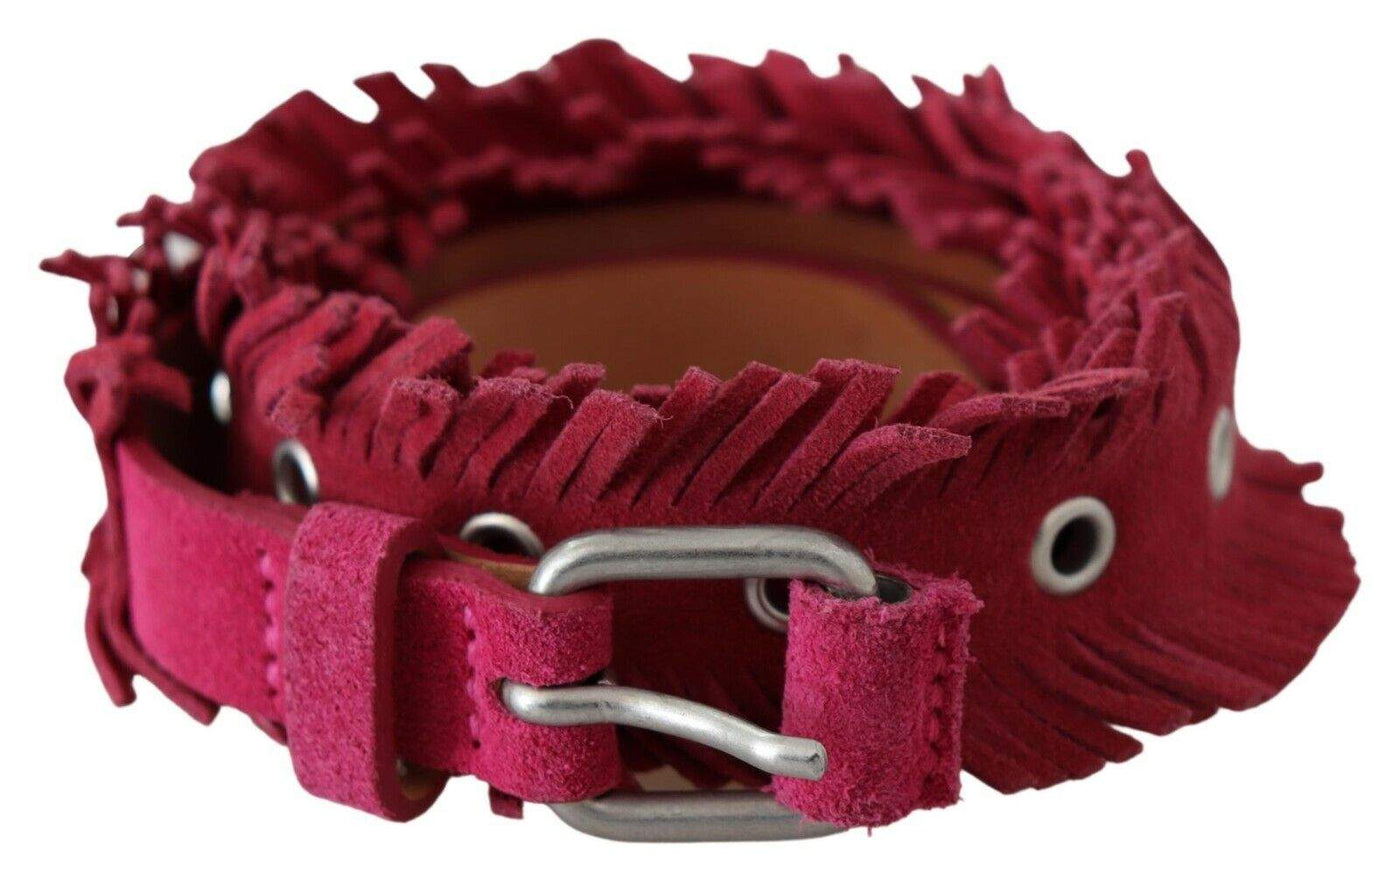 Ermanno Scervino Maroon Leather Fringes Silver Buckle Waist Belt 95 cm / 38 Inches, Belts - Women - Accessories, Ermanno Scervino, feed-agegroup-adult, feed-color-marrone, feed-gender-female, Marrone at SEYMAYKA